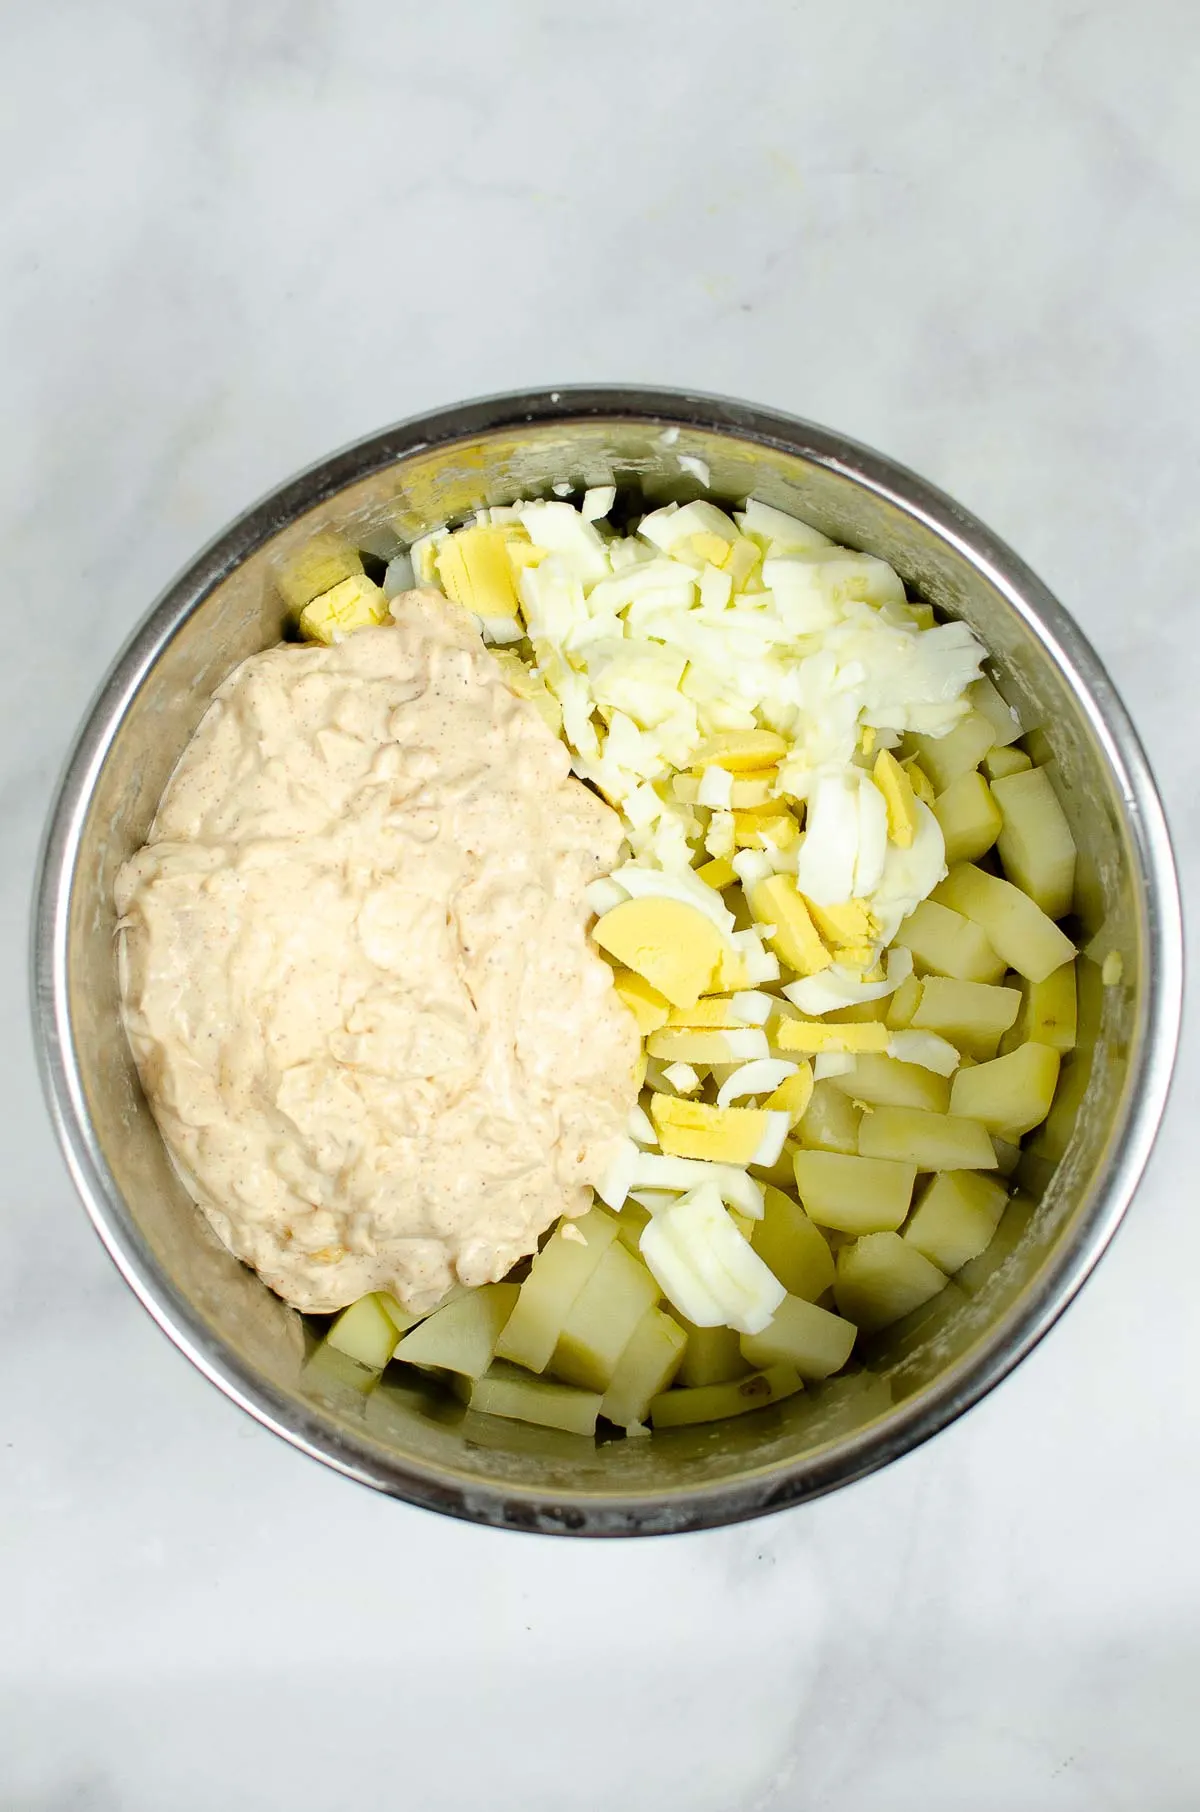 Chopped potatoes, eggs, and creamy dressing in the Instant Pot.